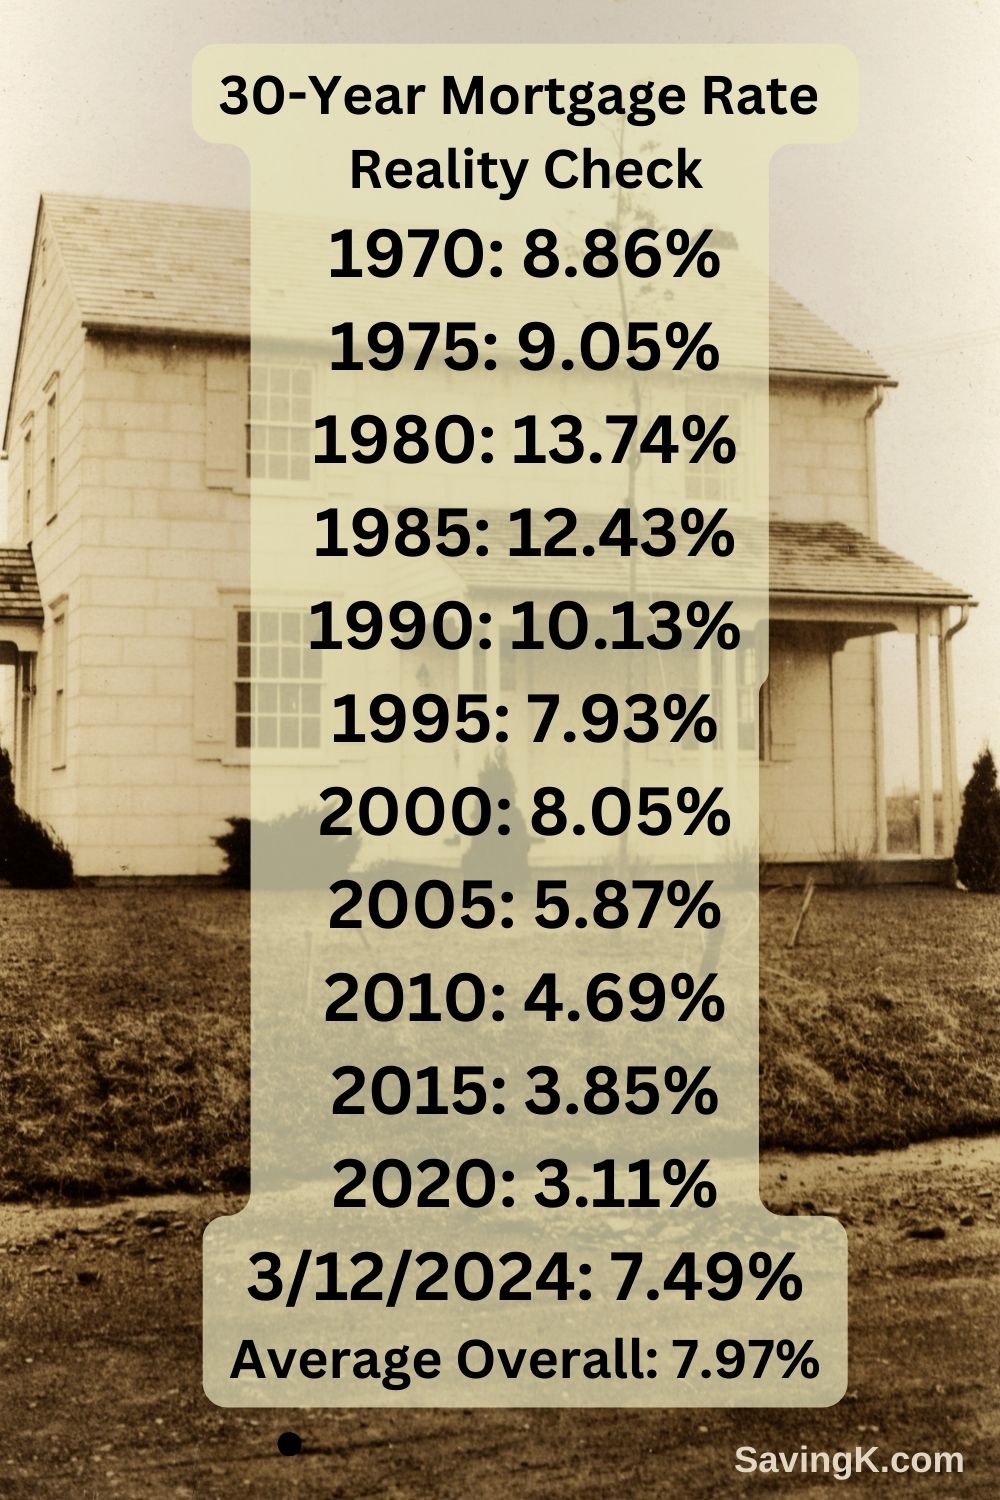 30-Year Mortgage Rate Reality Check